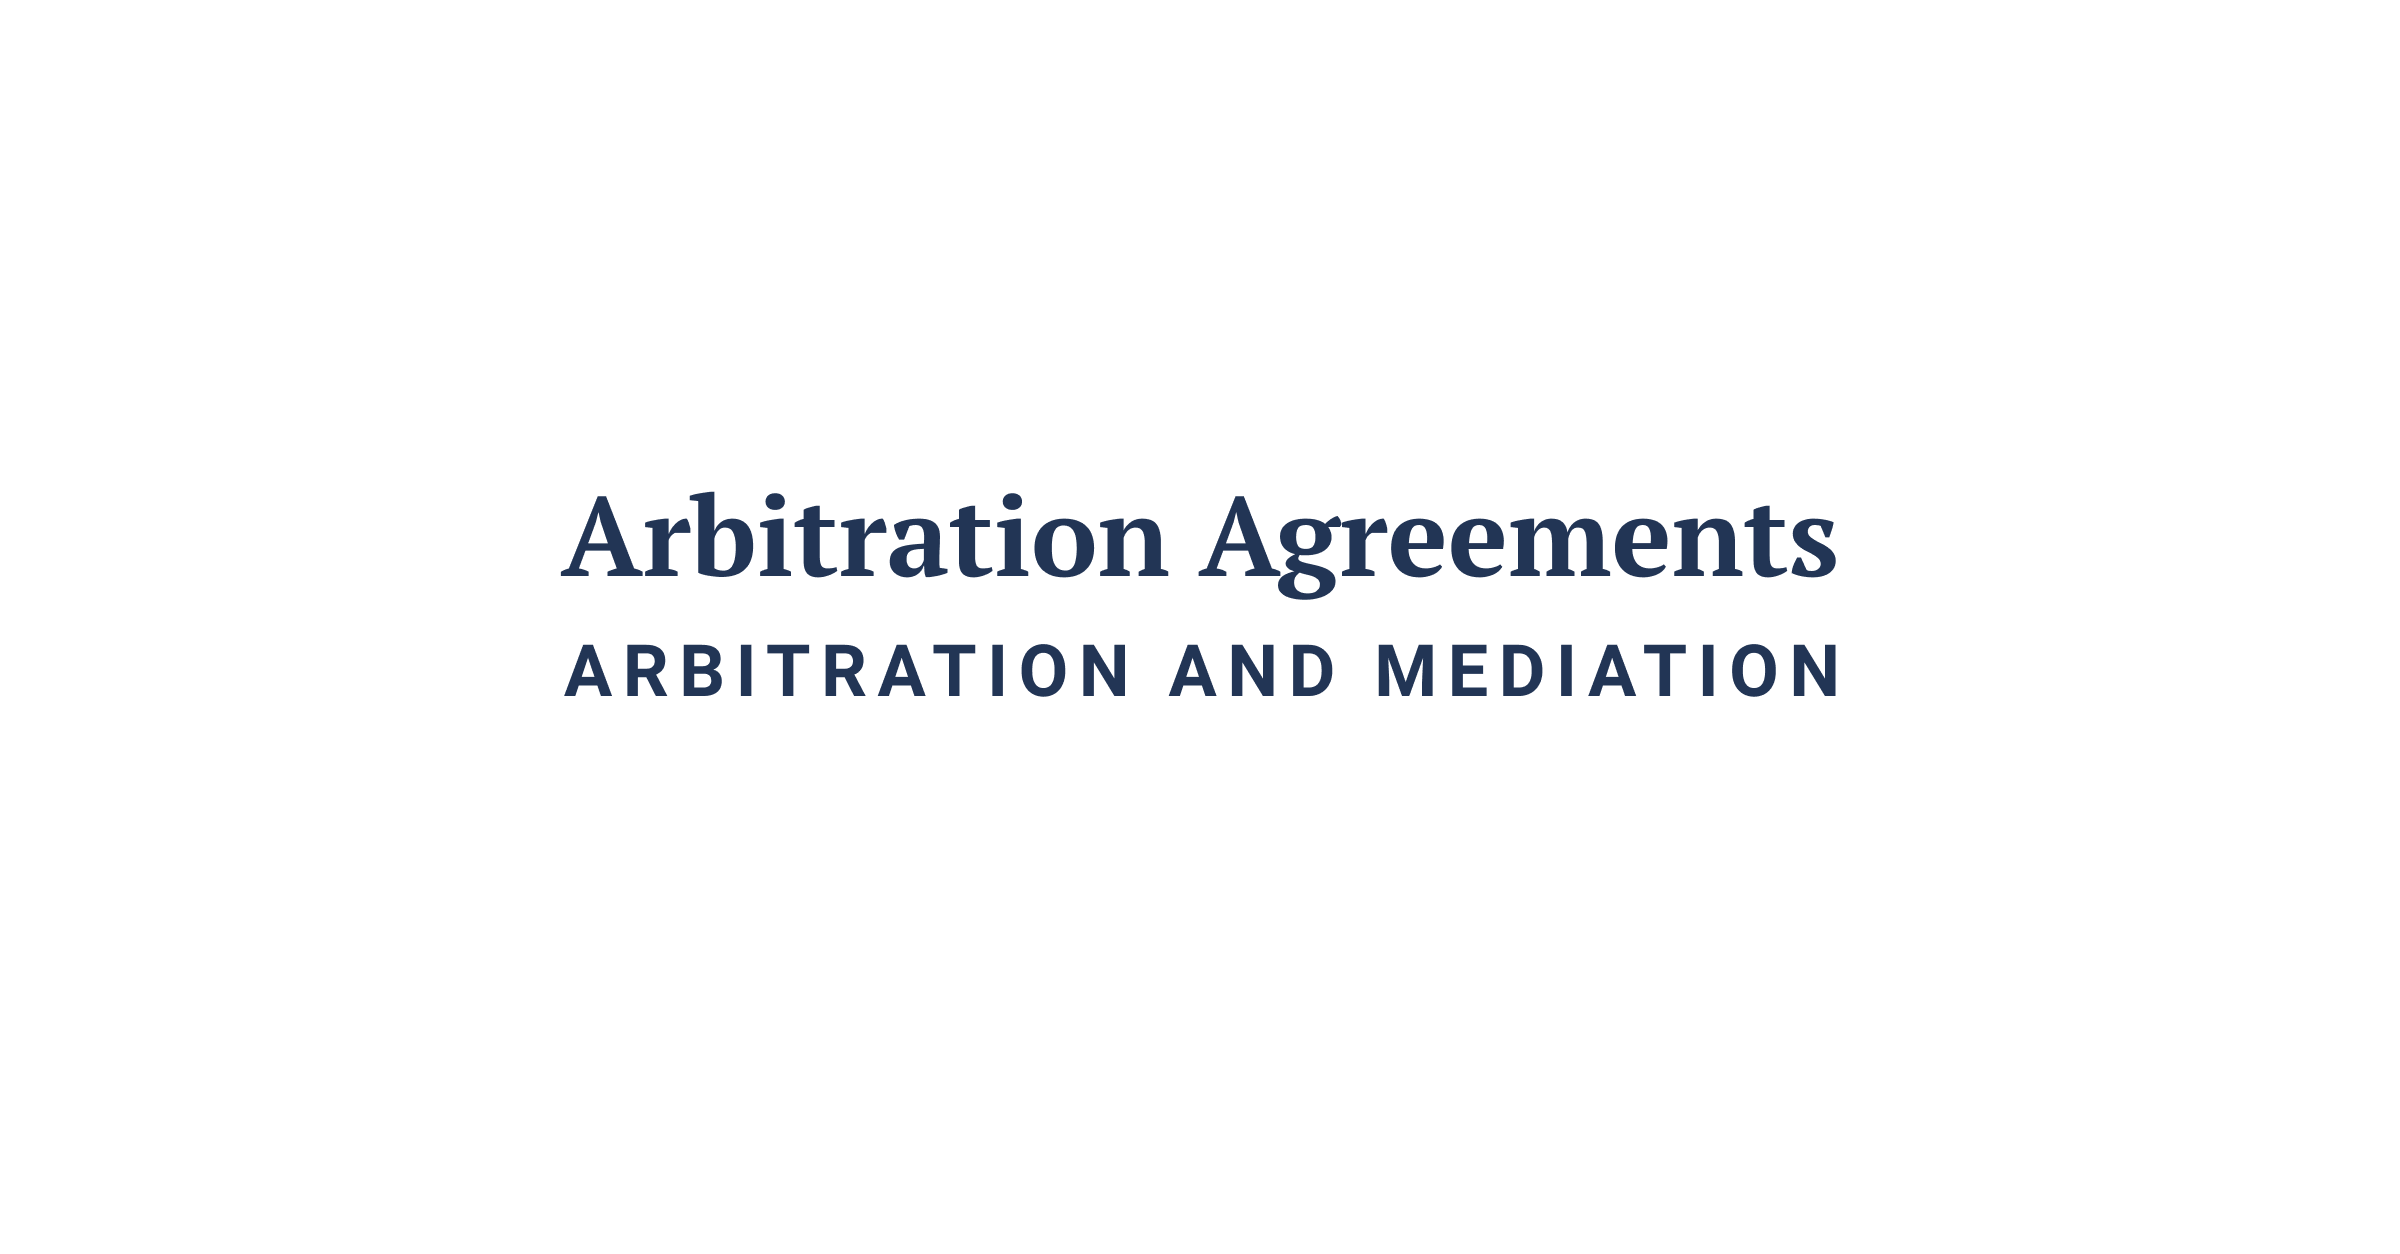 Arbitration Company product image reference 2